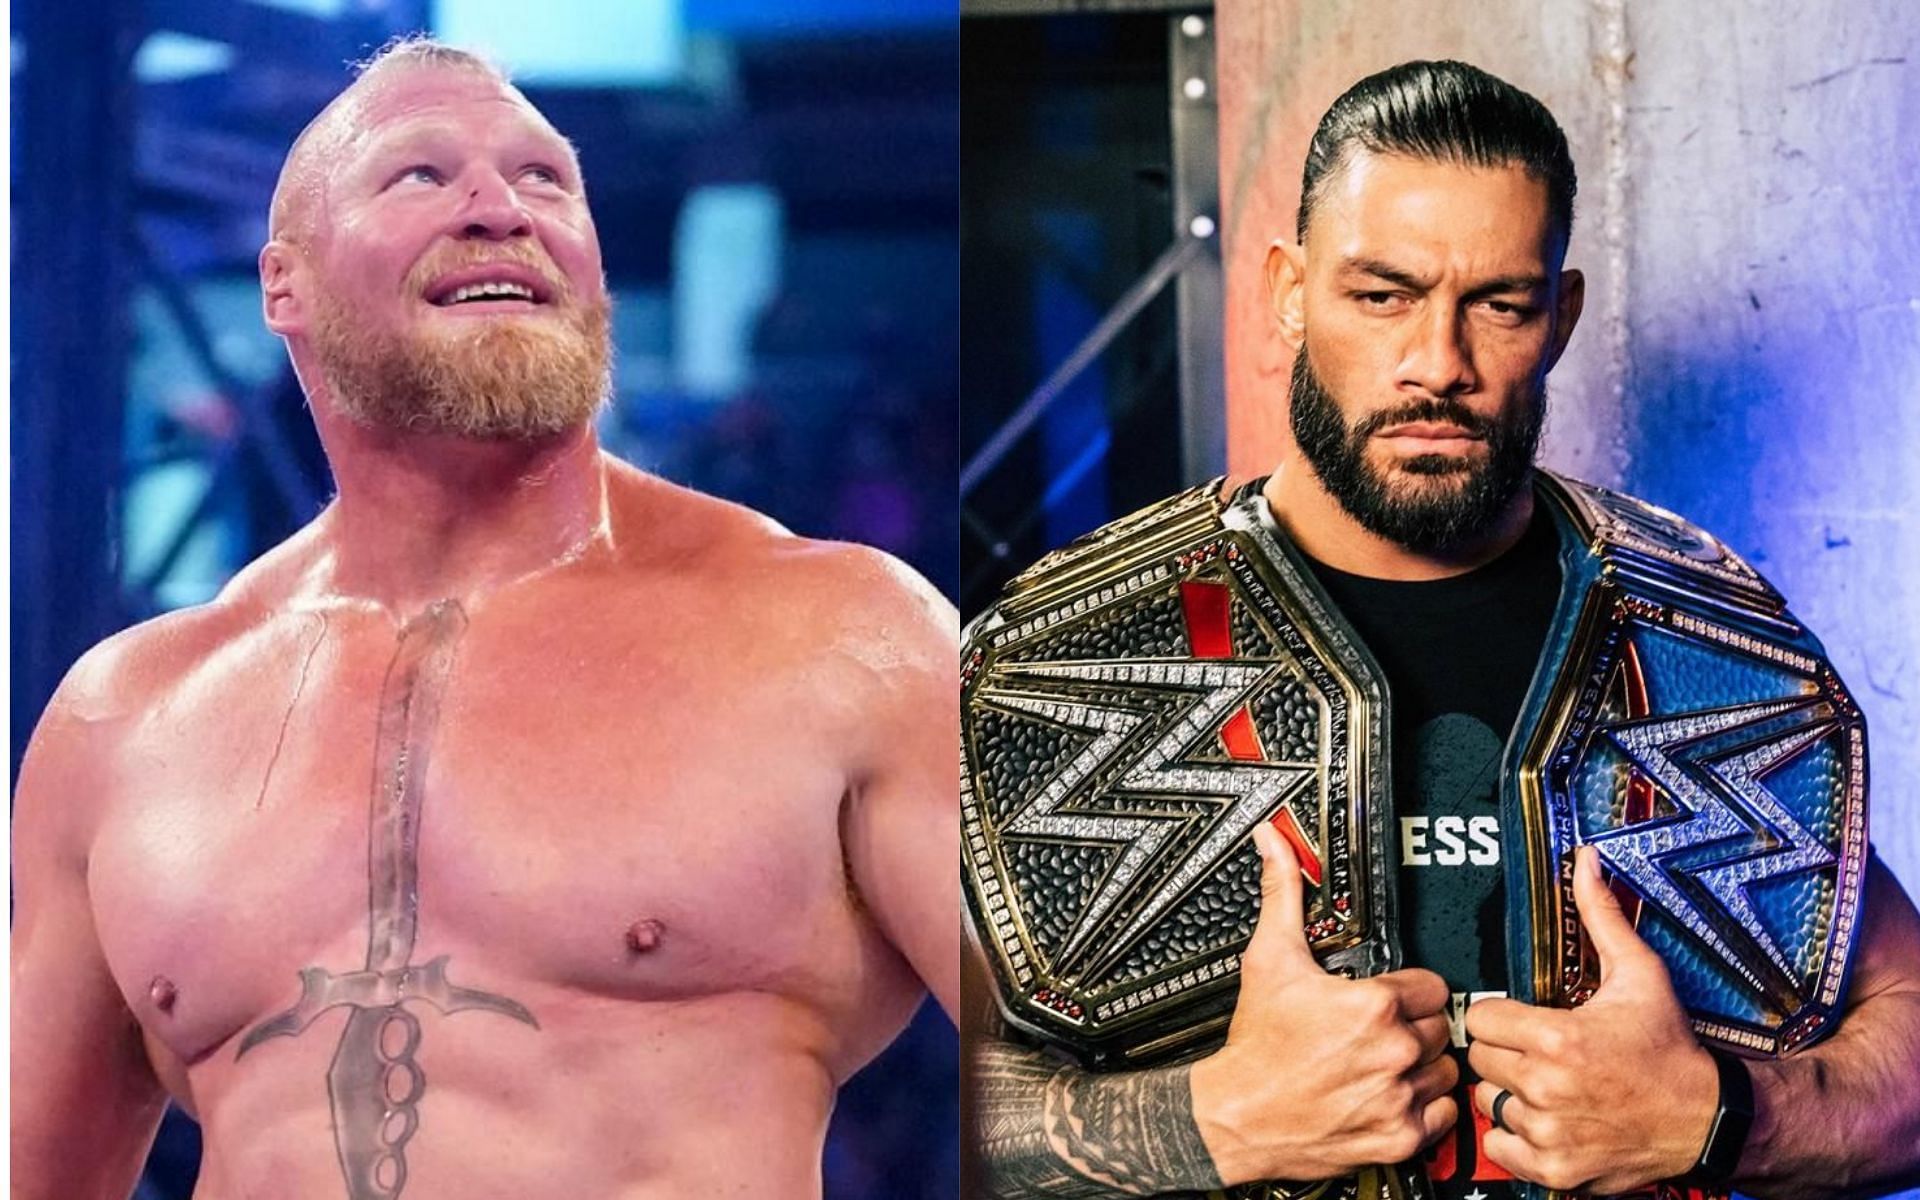 Brock Lesnar and Roman Reigns were among the rumors a lot in 2022.